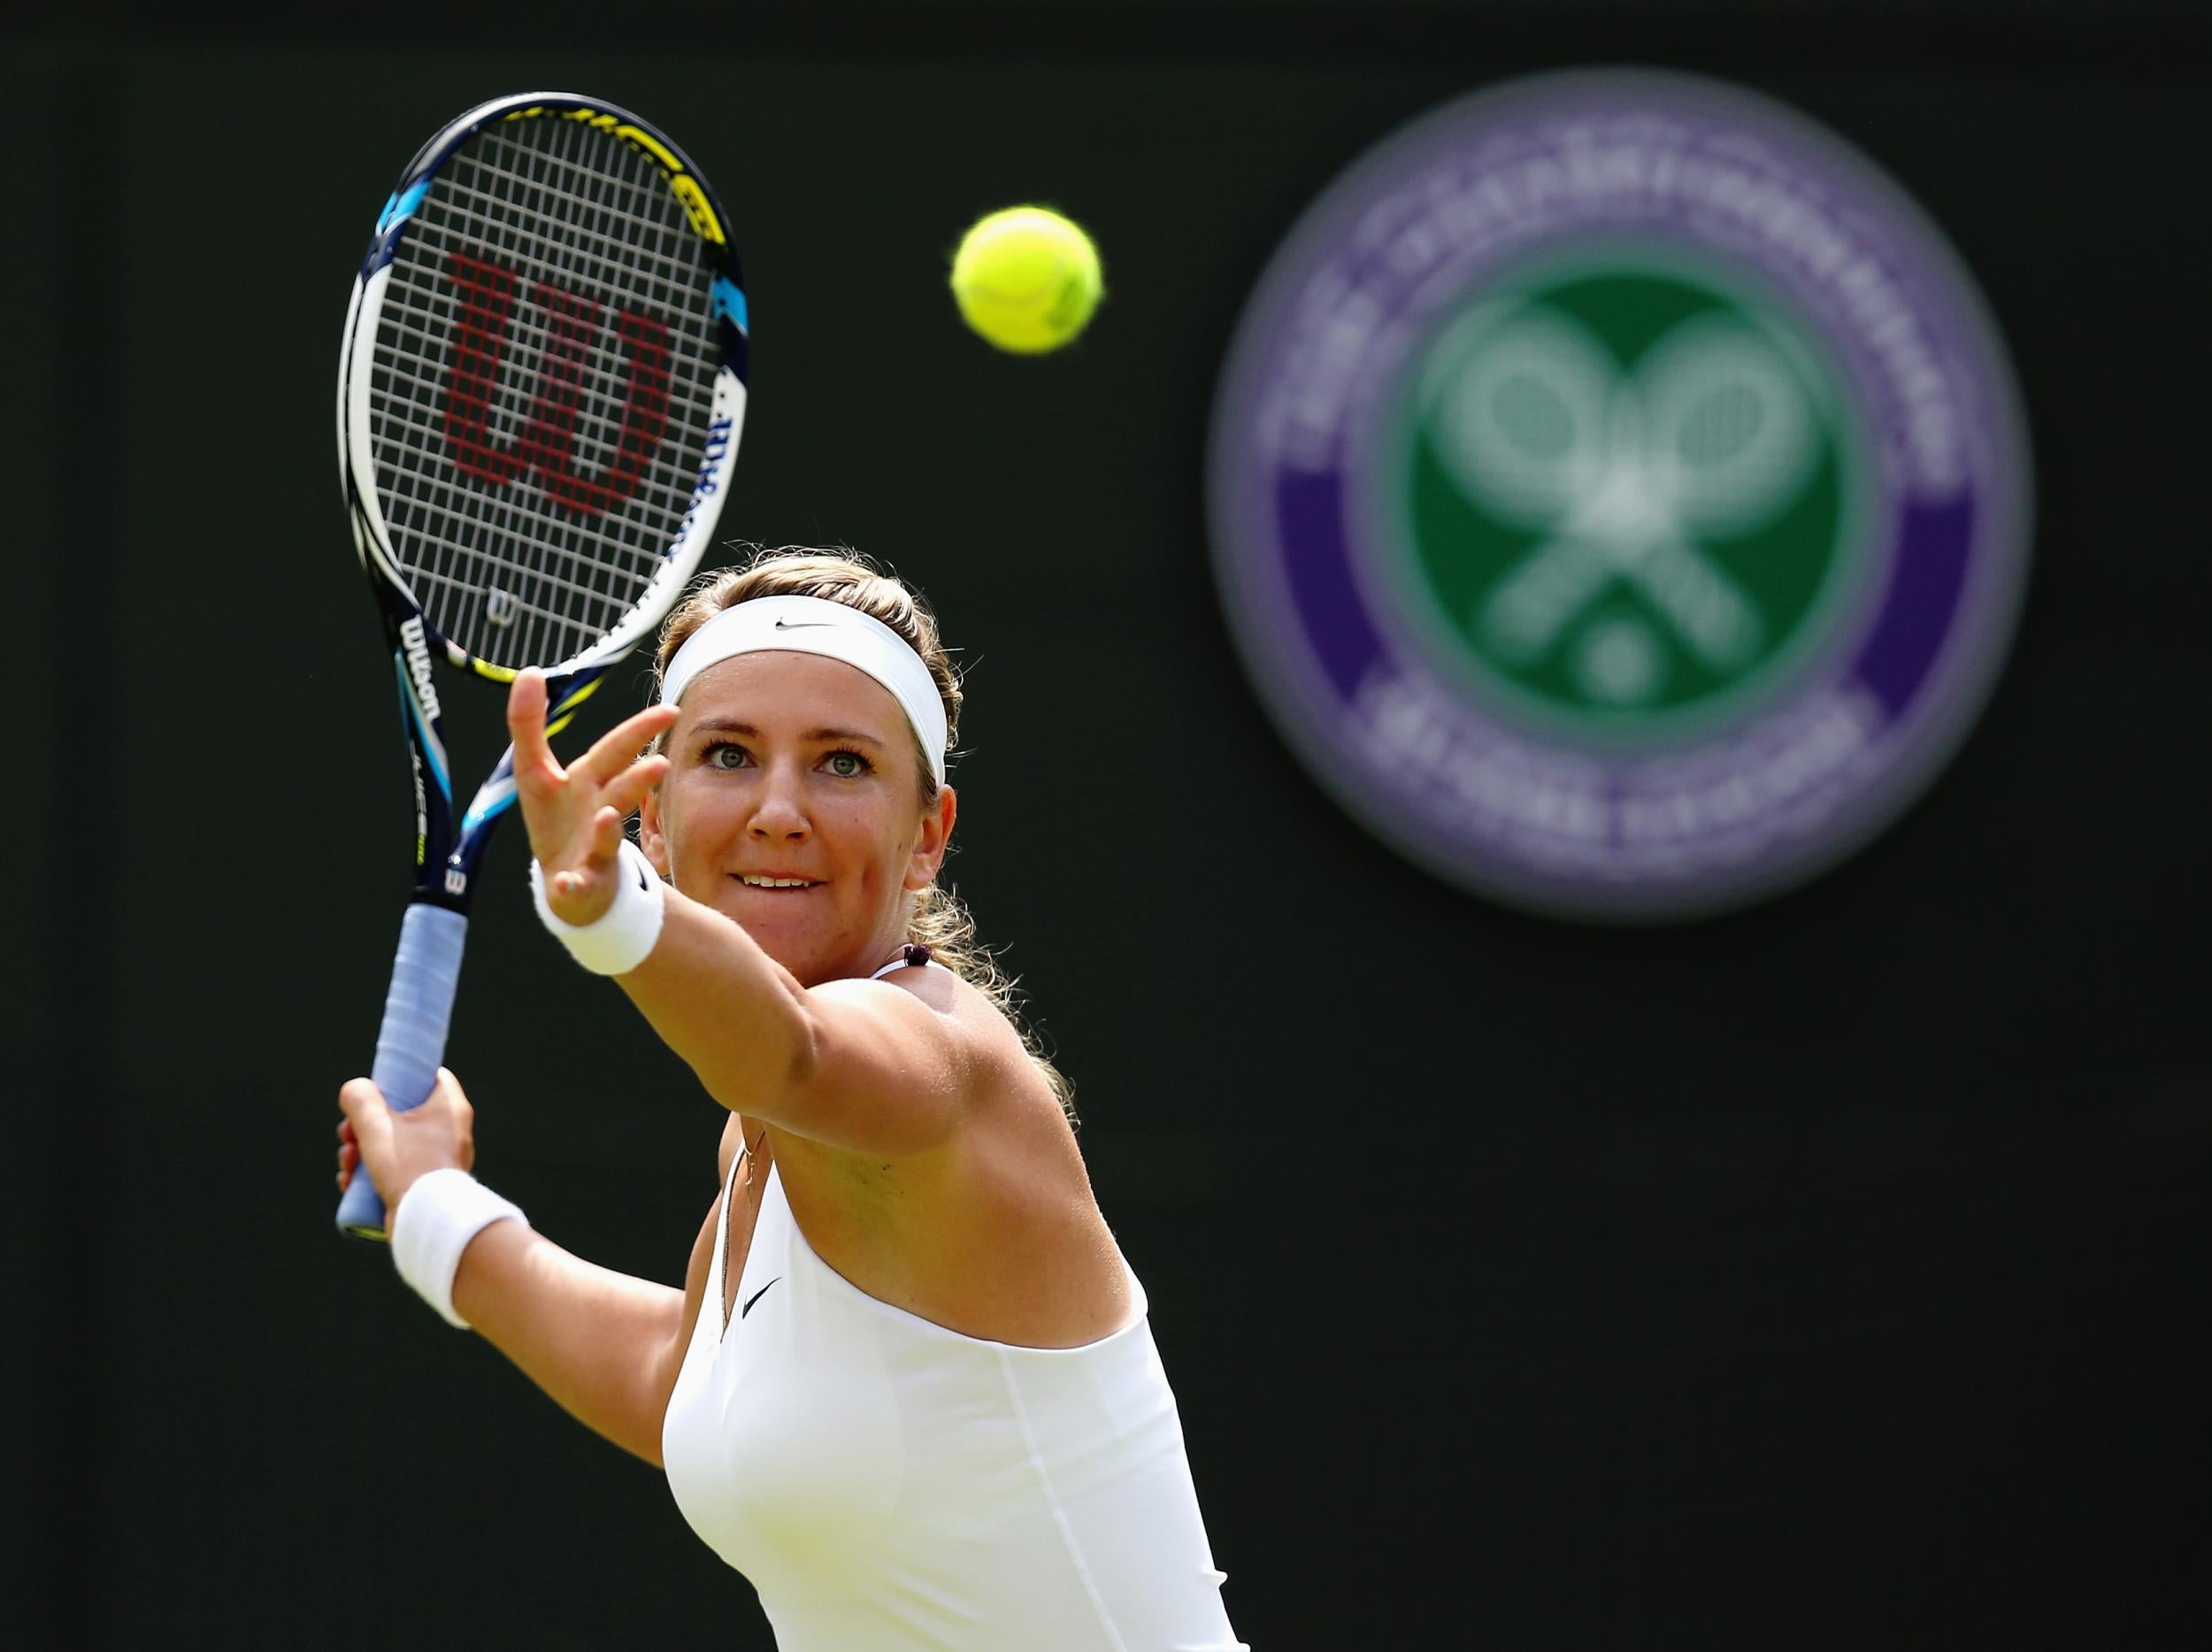 Azarenka has twice before reached the Wimbledon semi-finals, in 2011 and 2012